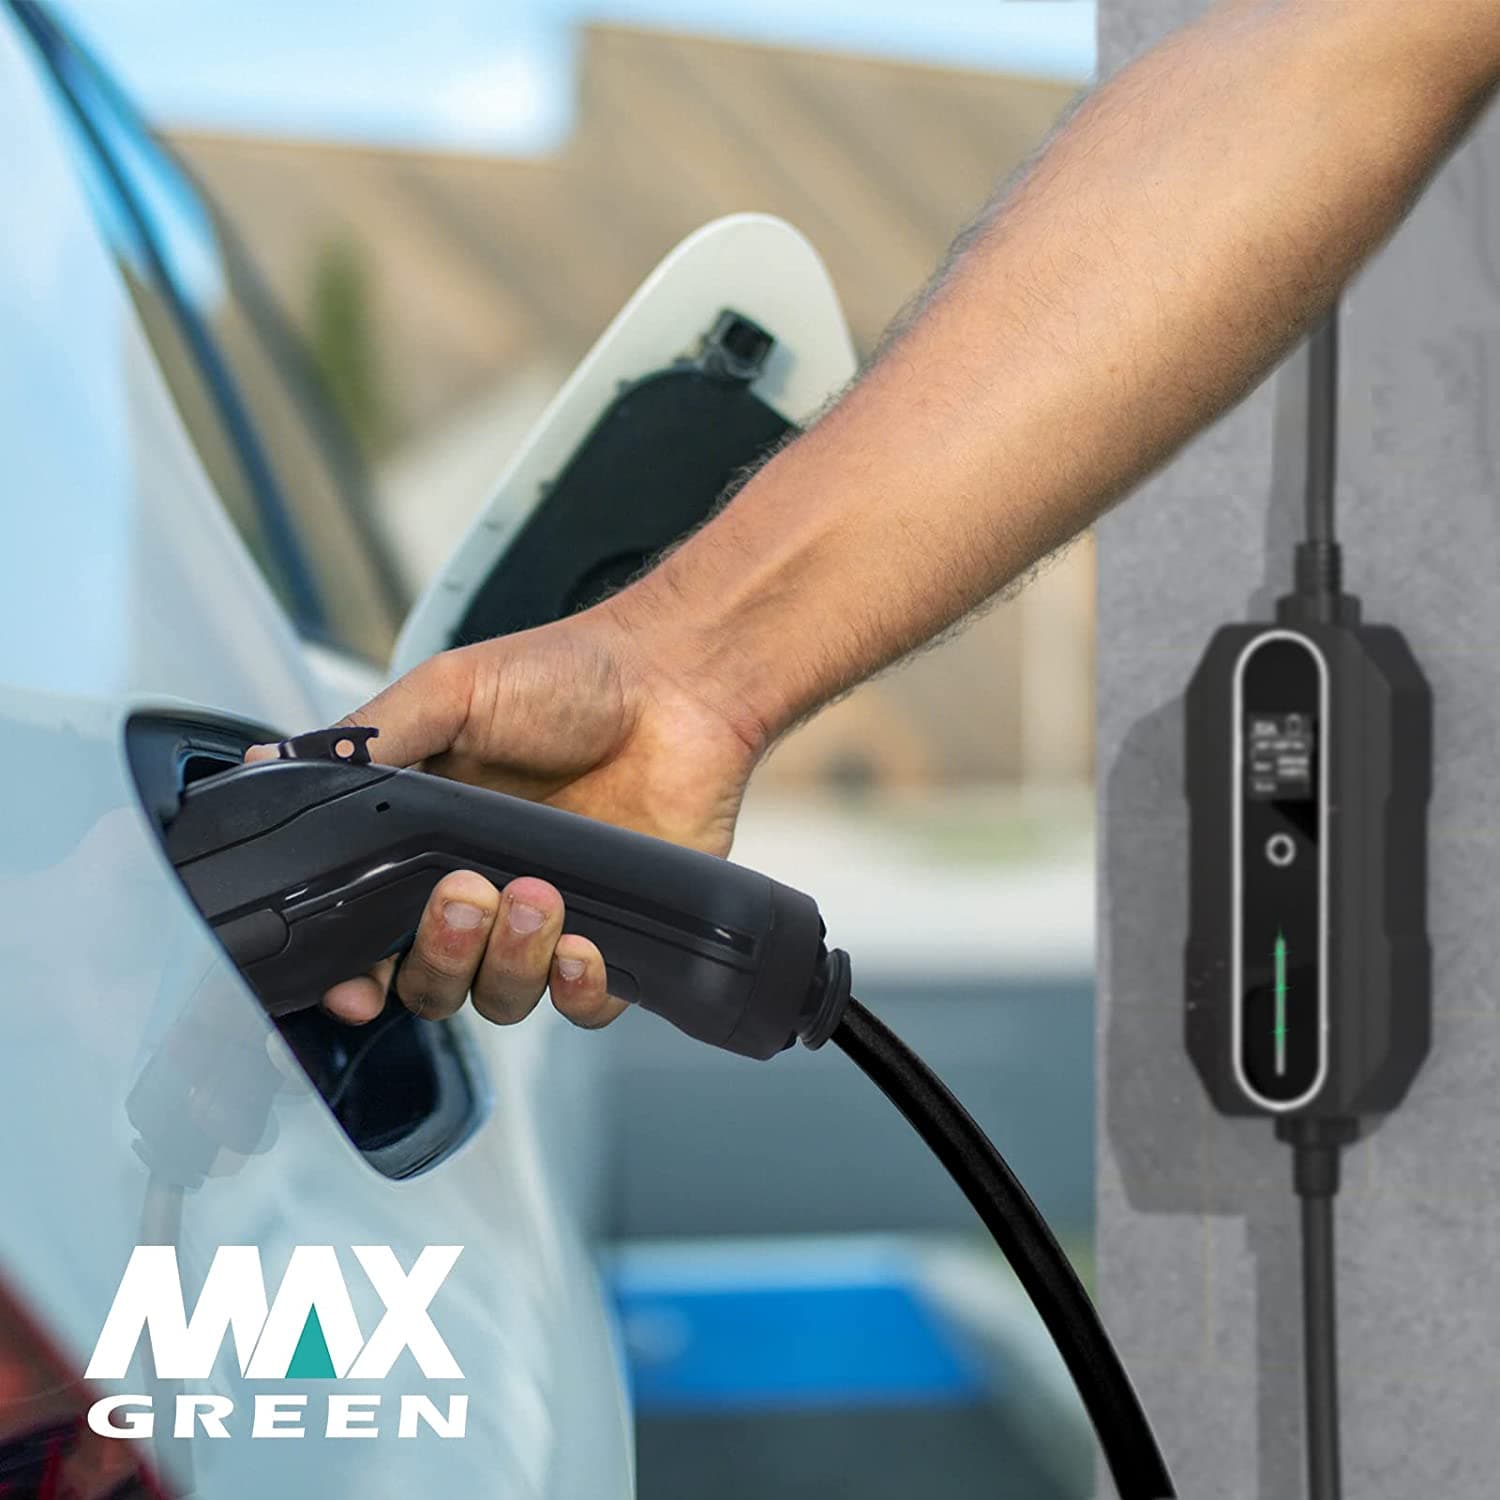 MAX GREEN Speeder Level 2 EV Charger, Adjustable Current (10A/16A/20A/24A/32A) Portable EVSE, 240V 25ft NEMA 6-50 Electric Vehicle Charging Station